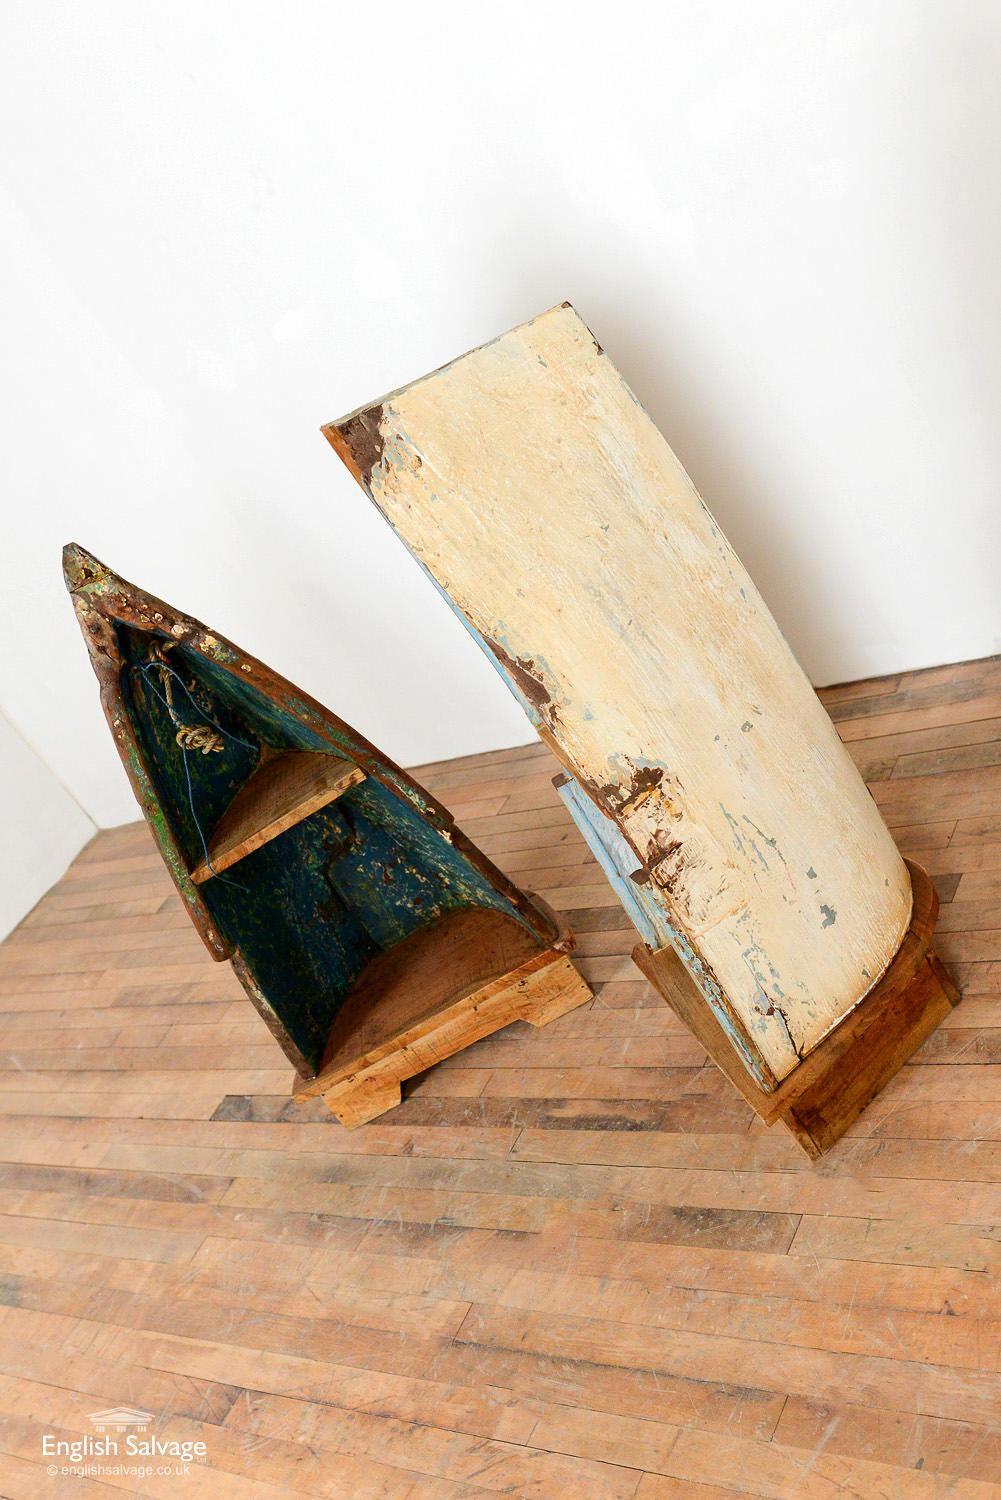 Repurposed Wood Boat Freestanding Shelf Units, 20th Century In Good Condition For Sale In London, GB